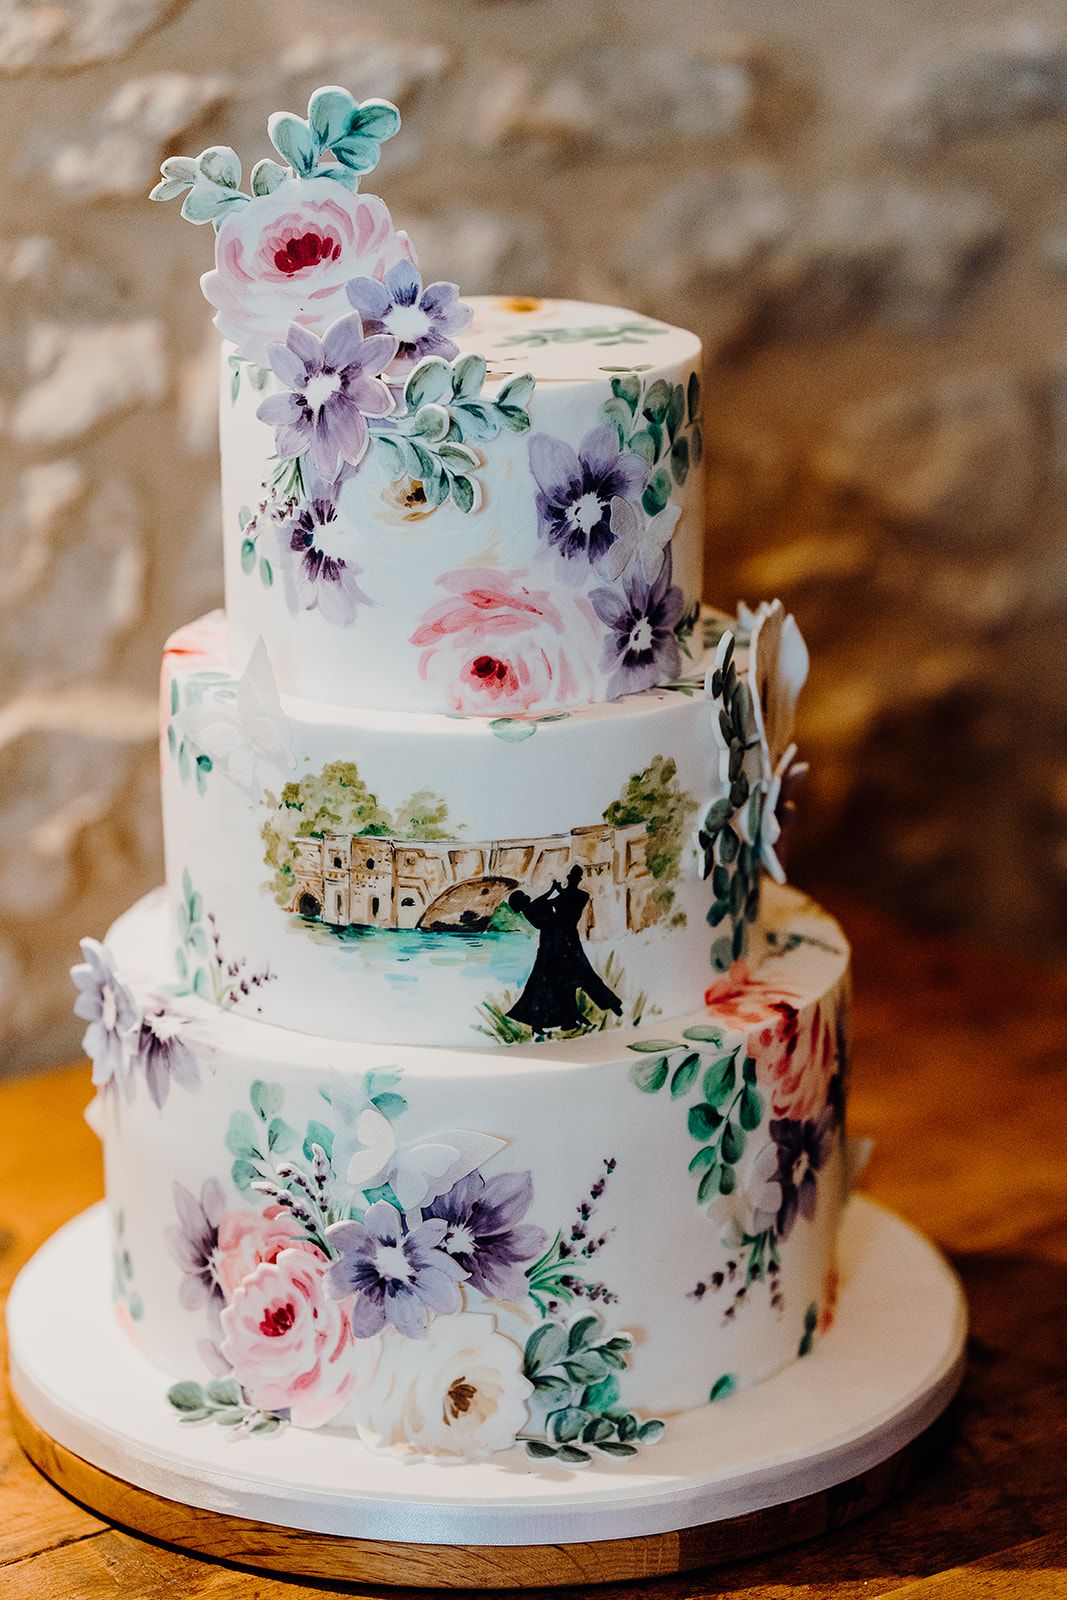 The most beautiful hand painted 3 tier wedding cake with Blenheim Palace bridge and lake with a couple dancing silhouetted. Incredible cake by Nevie Pie Cakes, photo thanks to Sam and Steve Photography. 